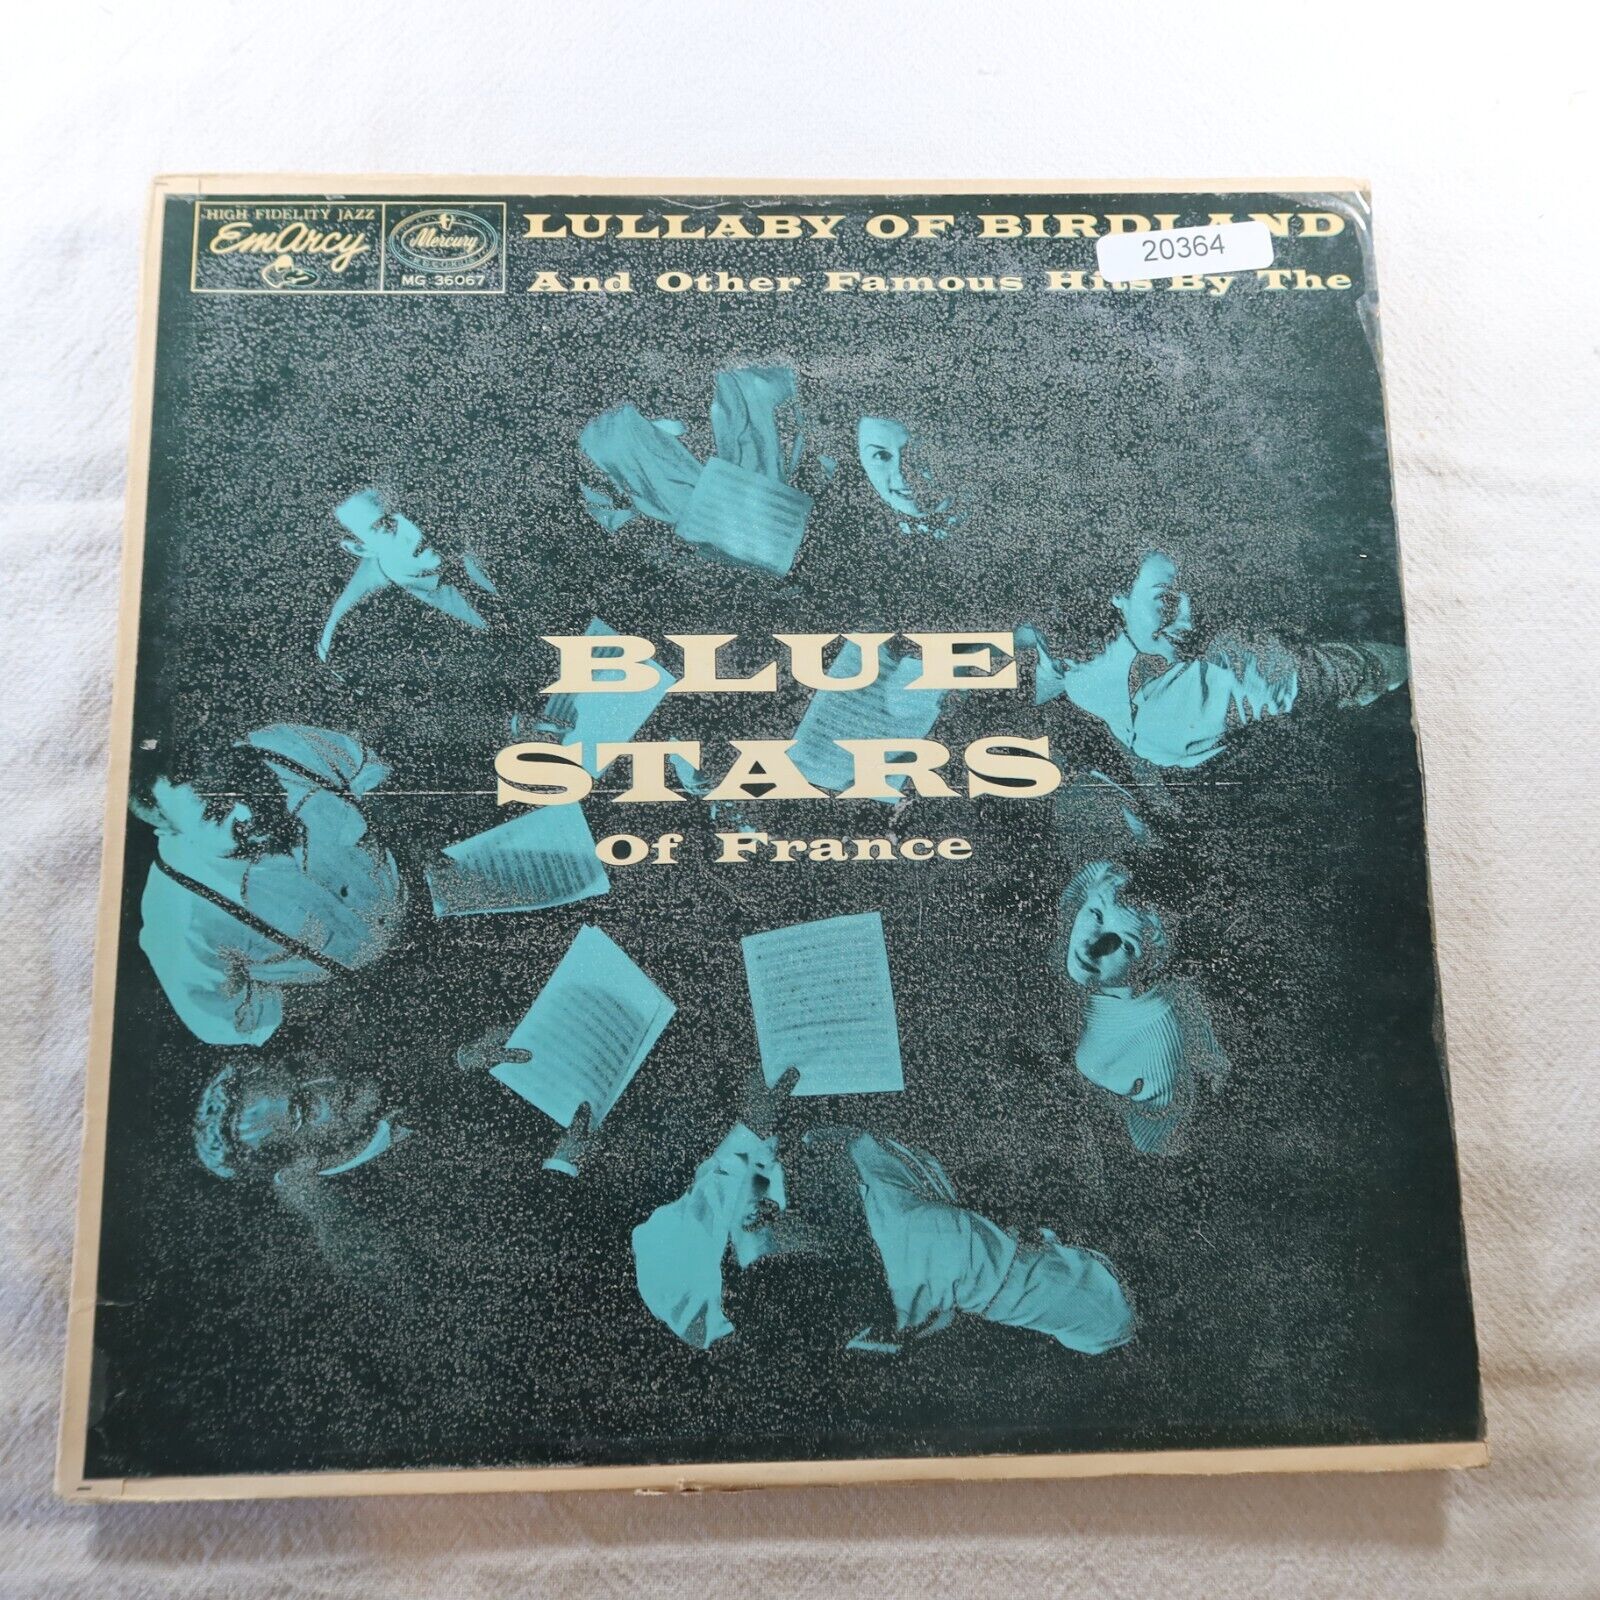 Blue Stars Of France Lullaby Of Birdland And Other Famous Hits   Record Album LP